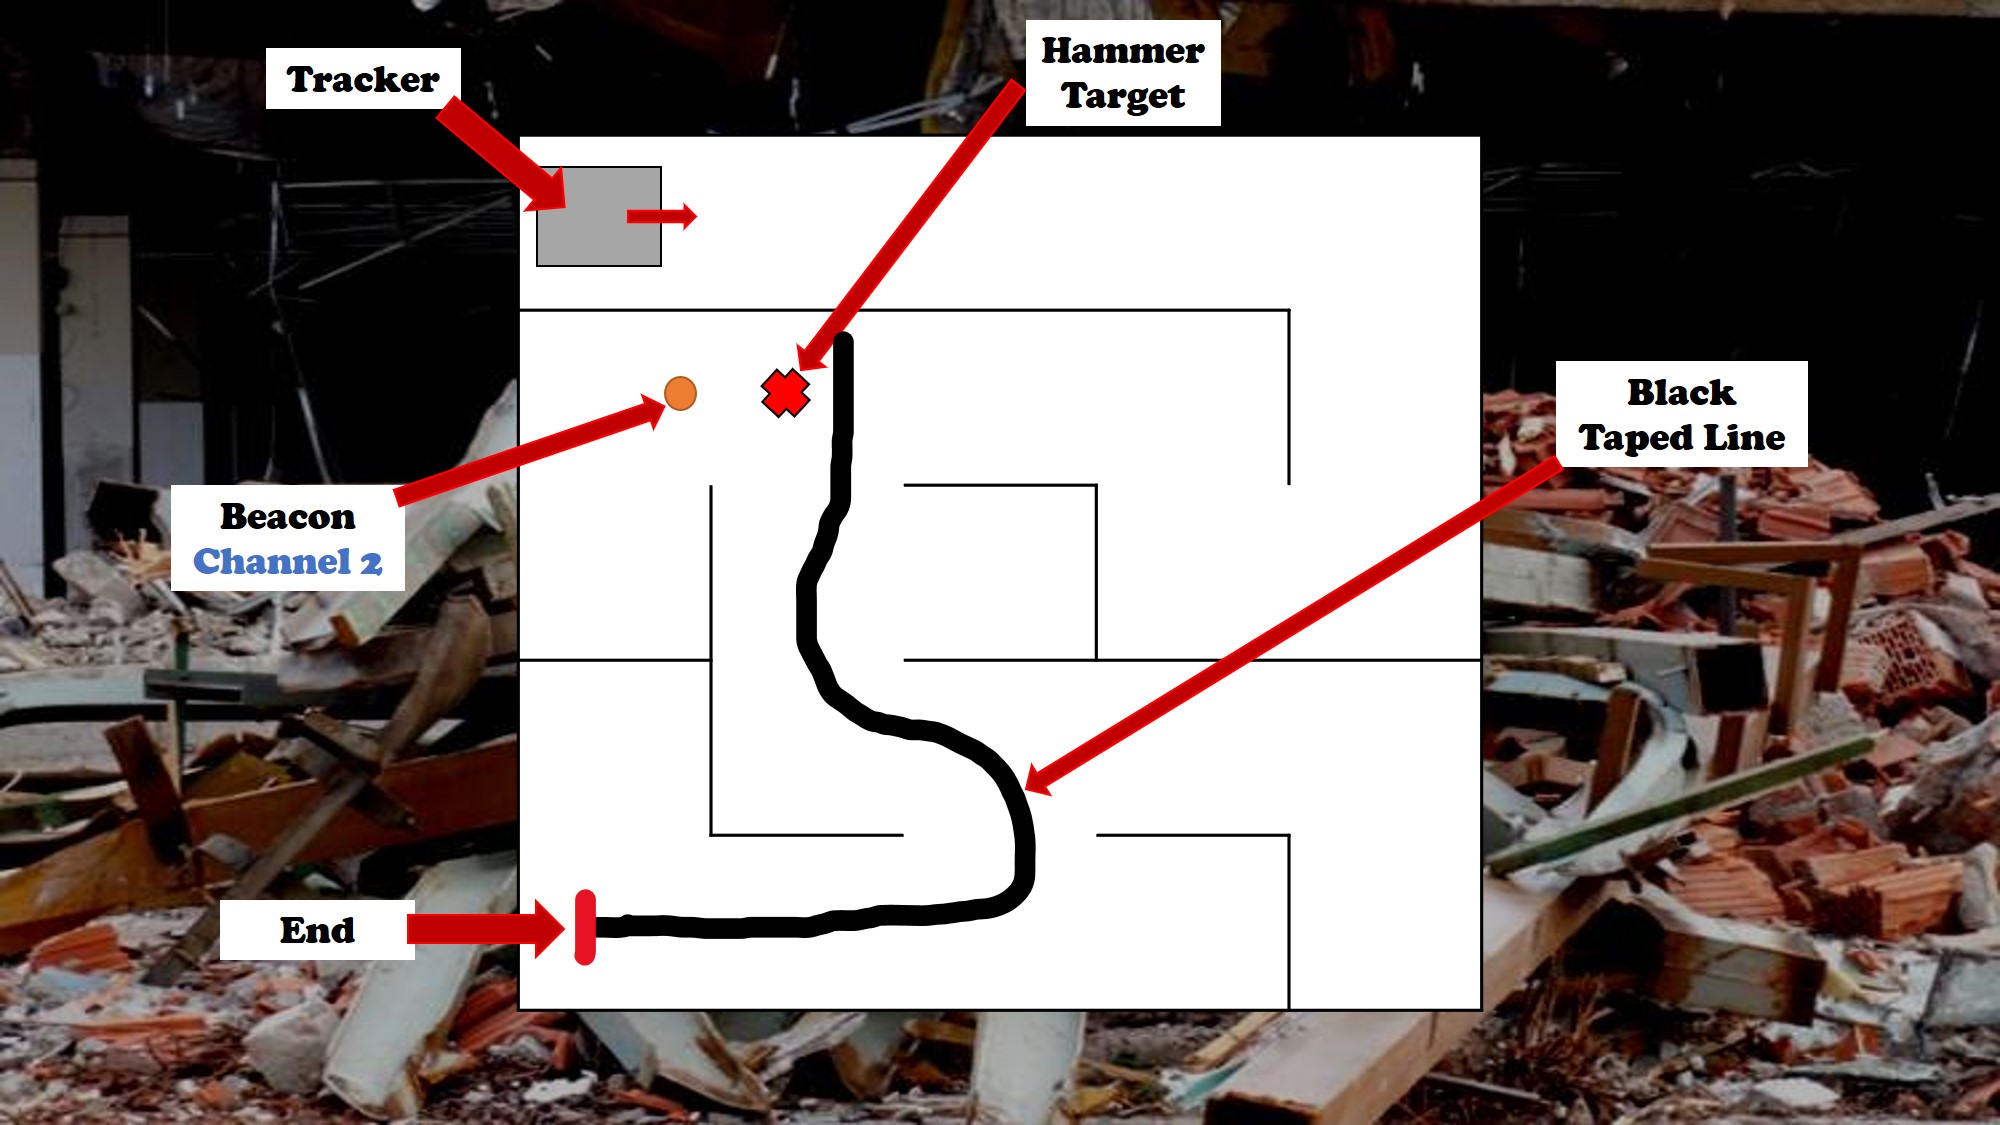 The robot is in a maze where there is a hammer target in front of a beacon (set to channel 1) that must be hit with the hammer tool. A black taped line then leads out of the room until it reaches a strip of red tape marking the end location